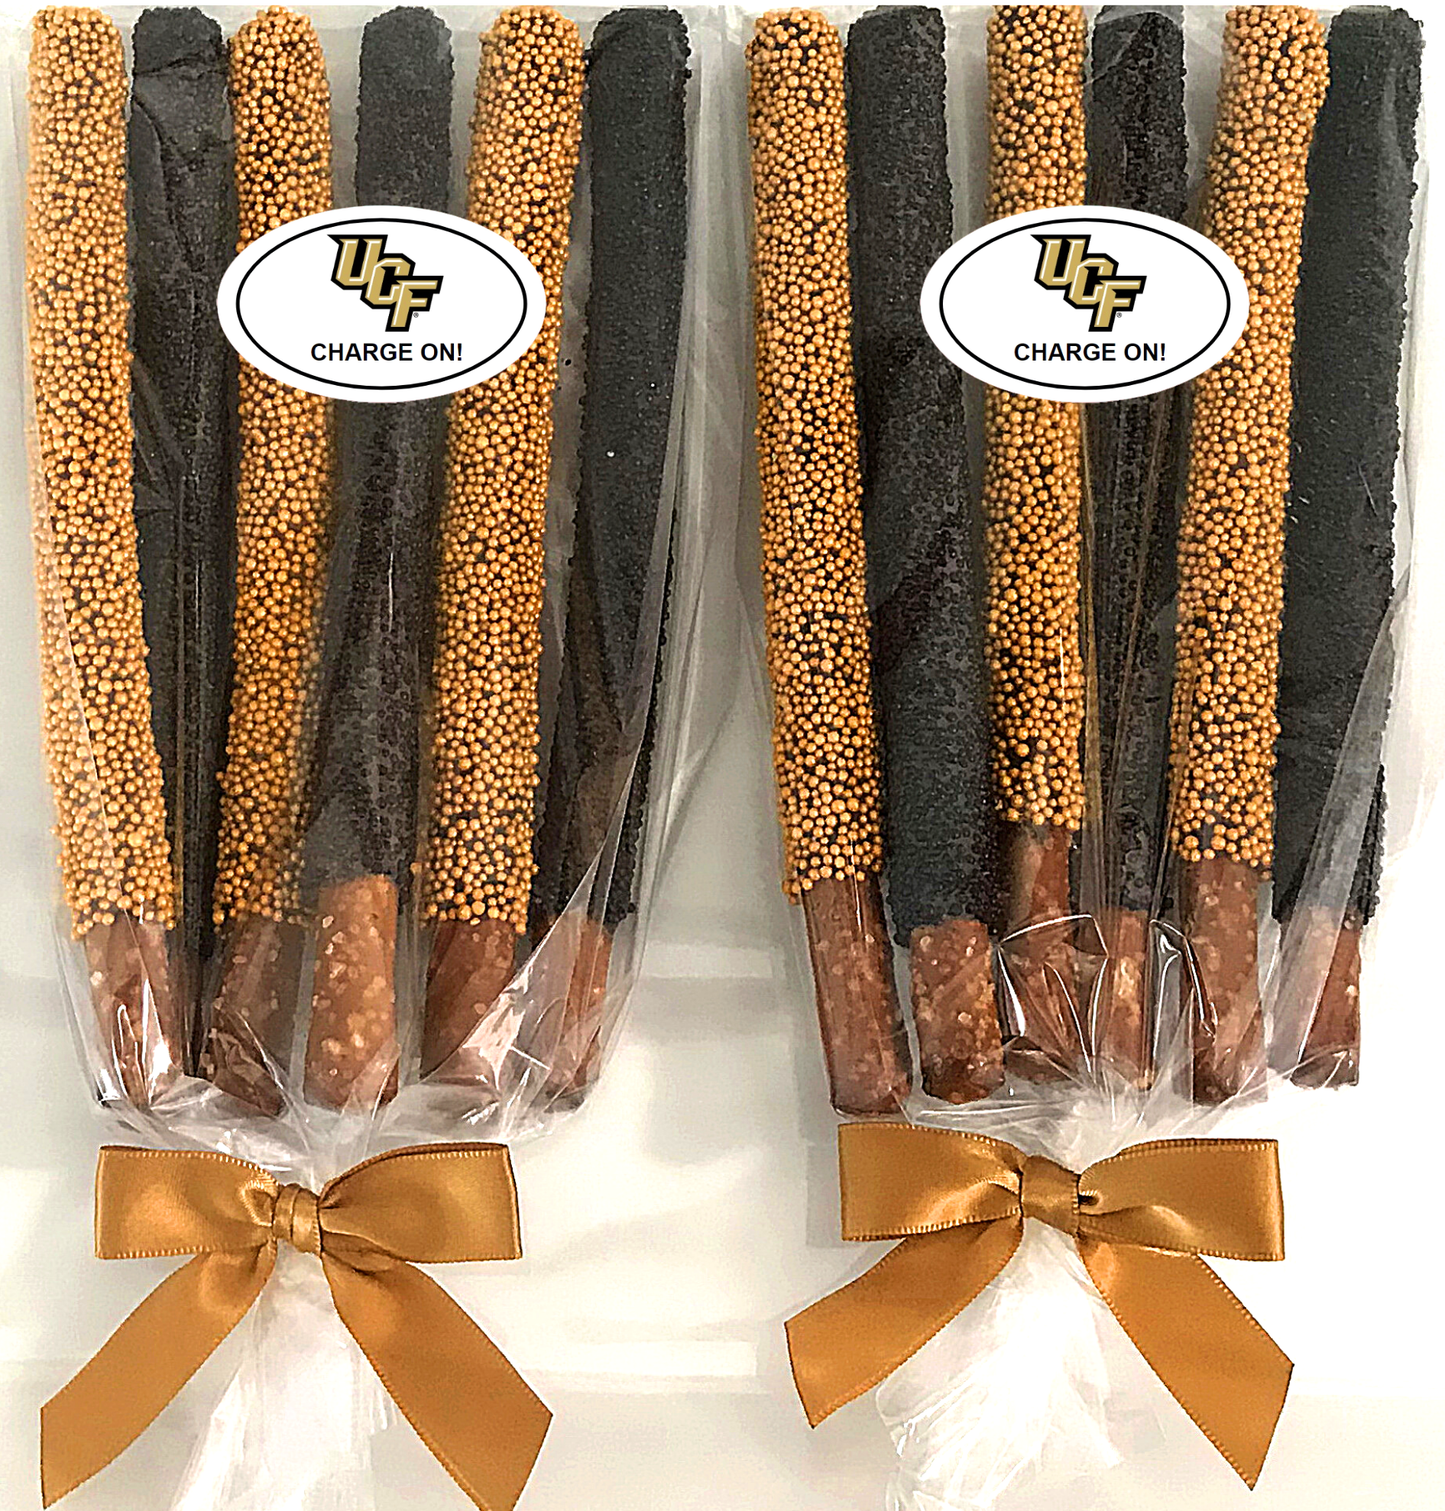 University of Central Florida Chocolate Covered Pretzel Rods